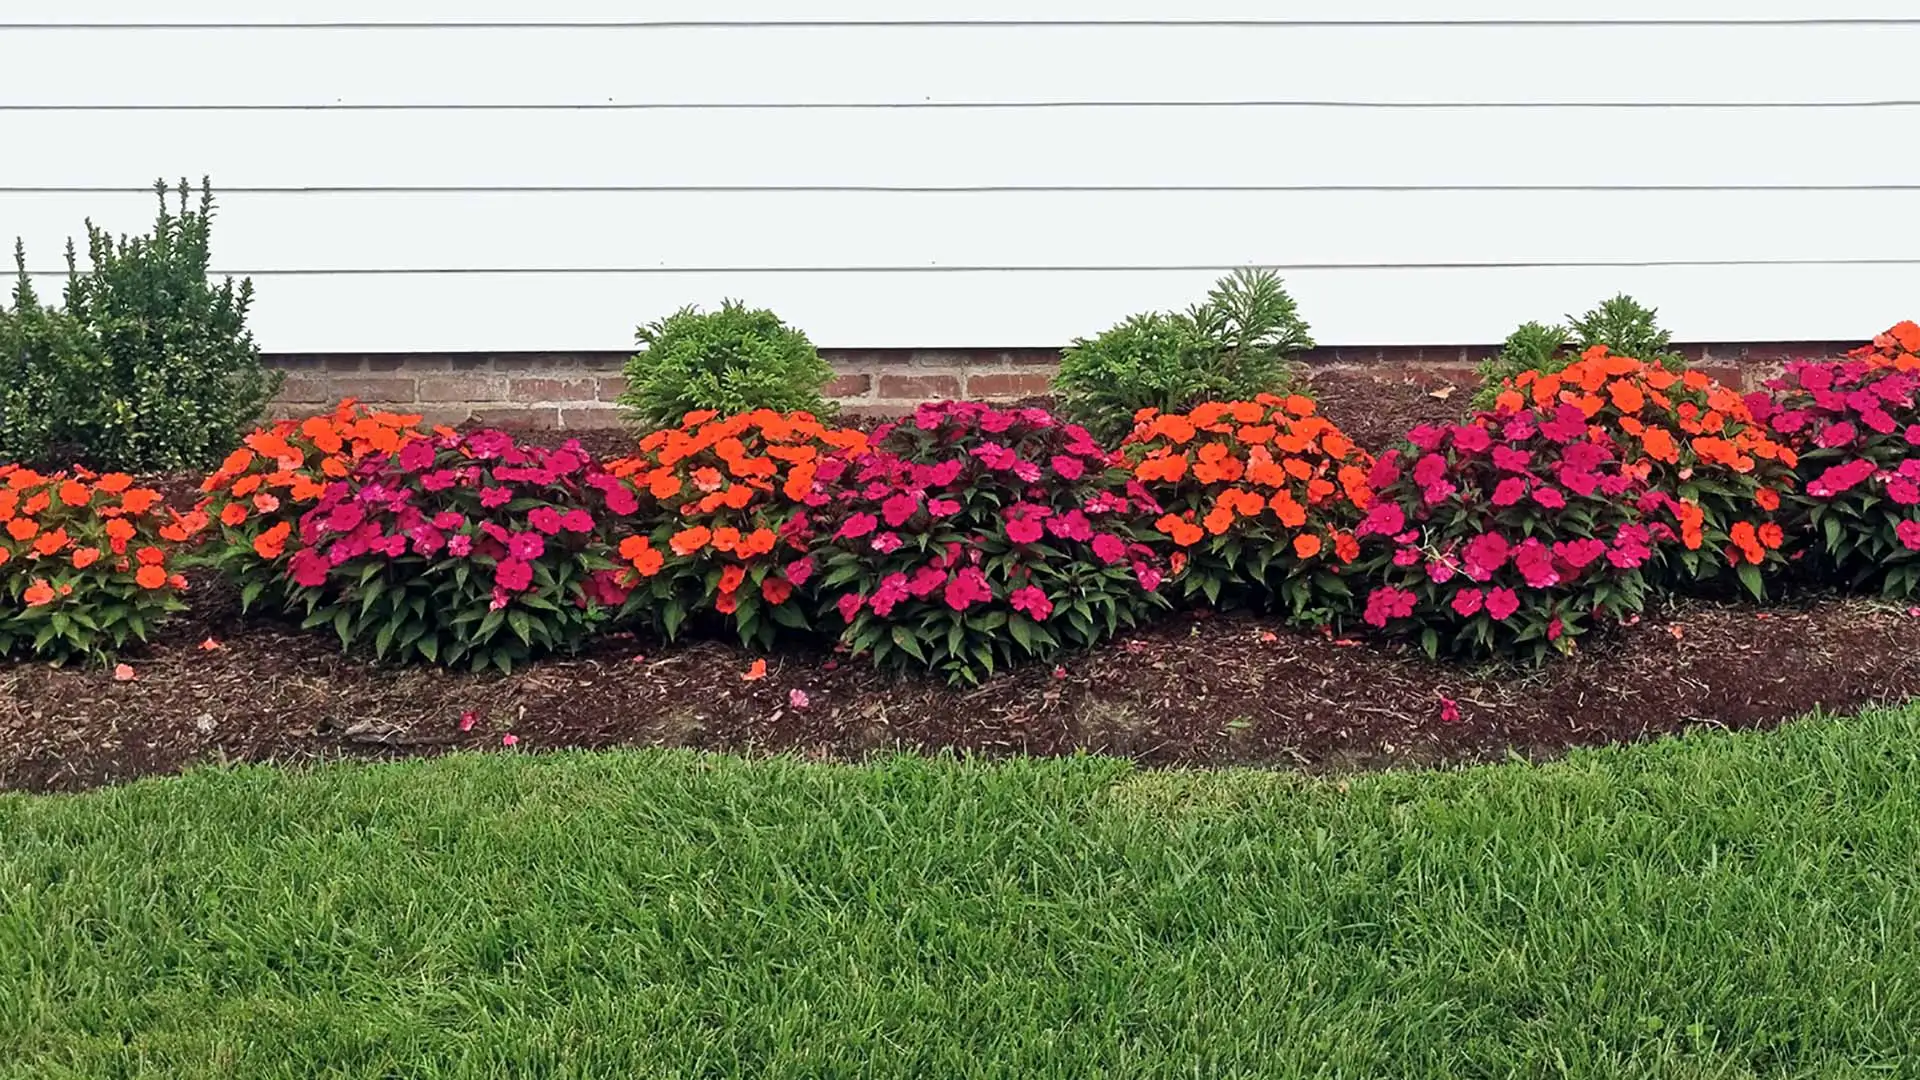 How to Keep the Plants in Your Landscape Beds Healthy & Looking Their Best